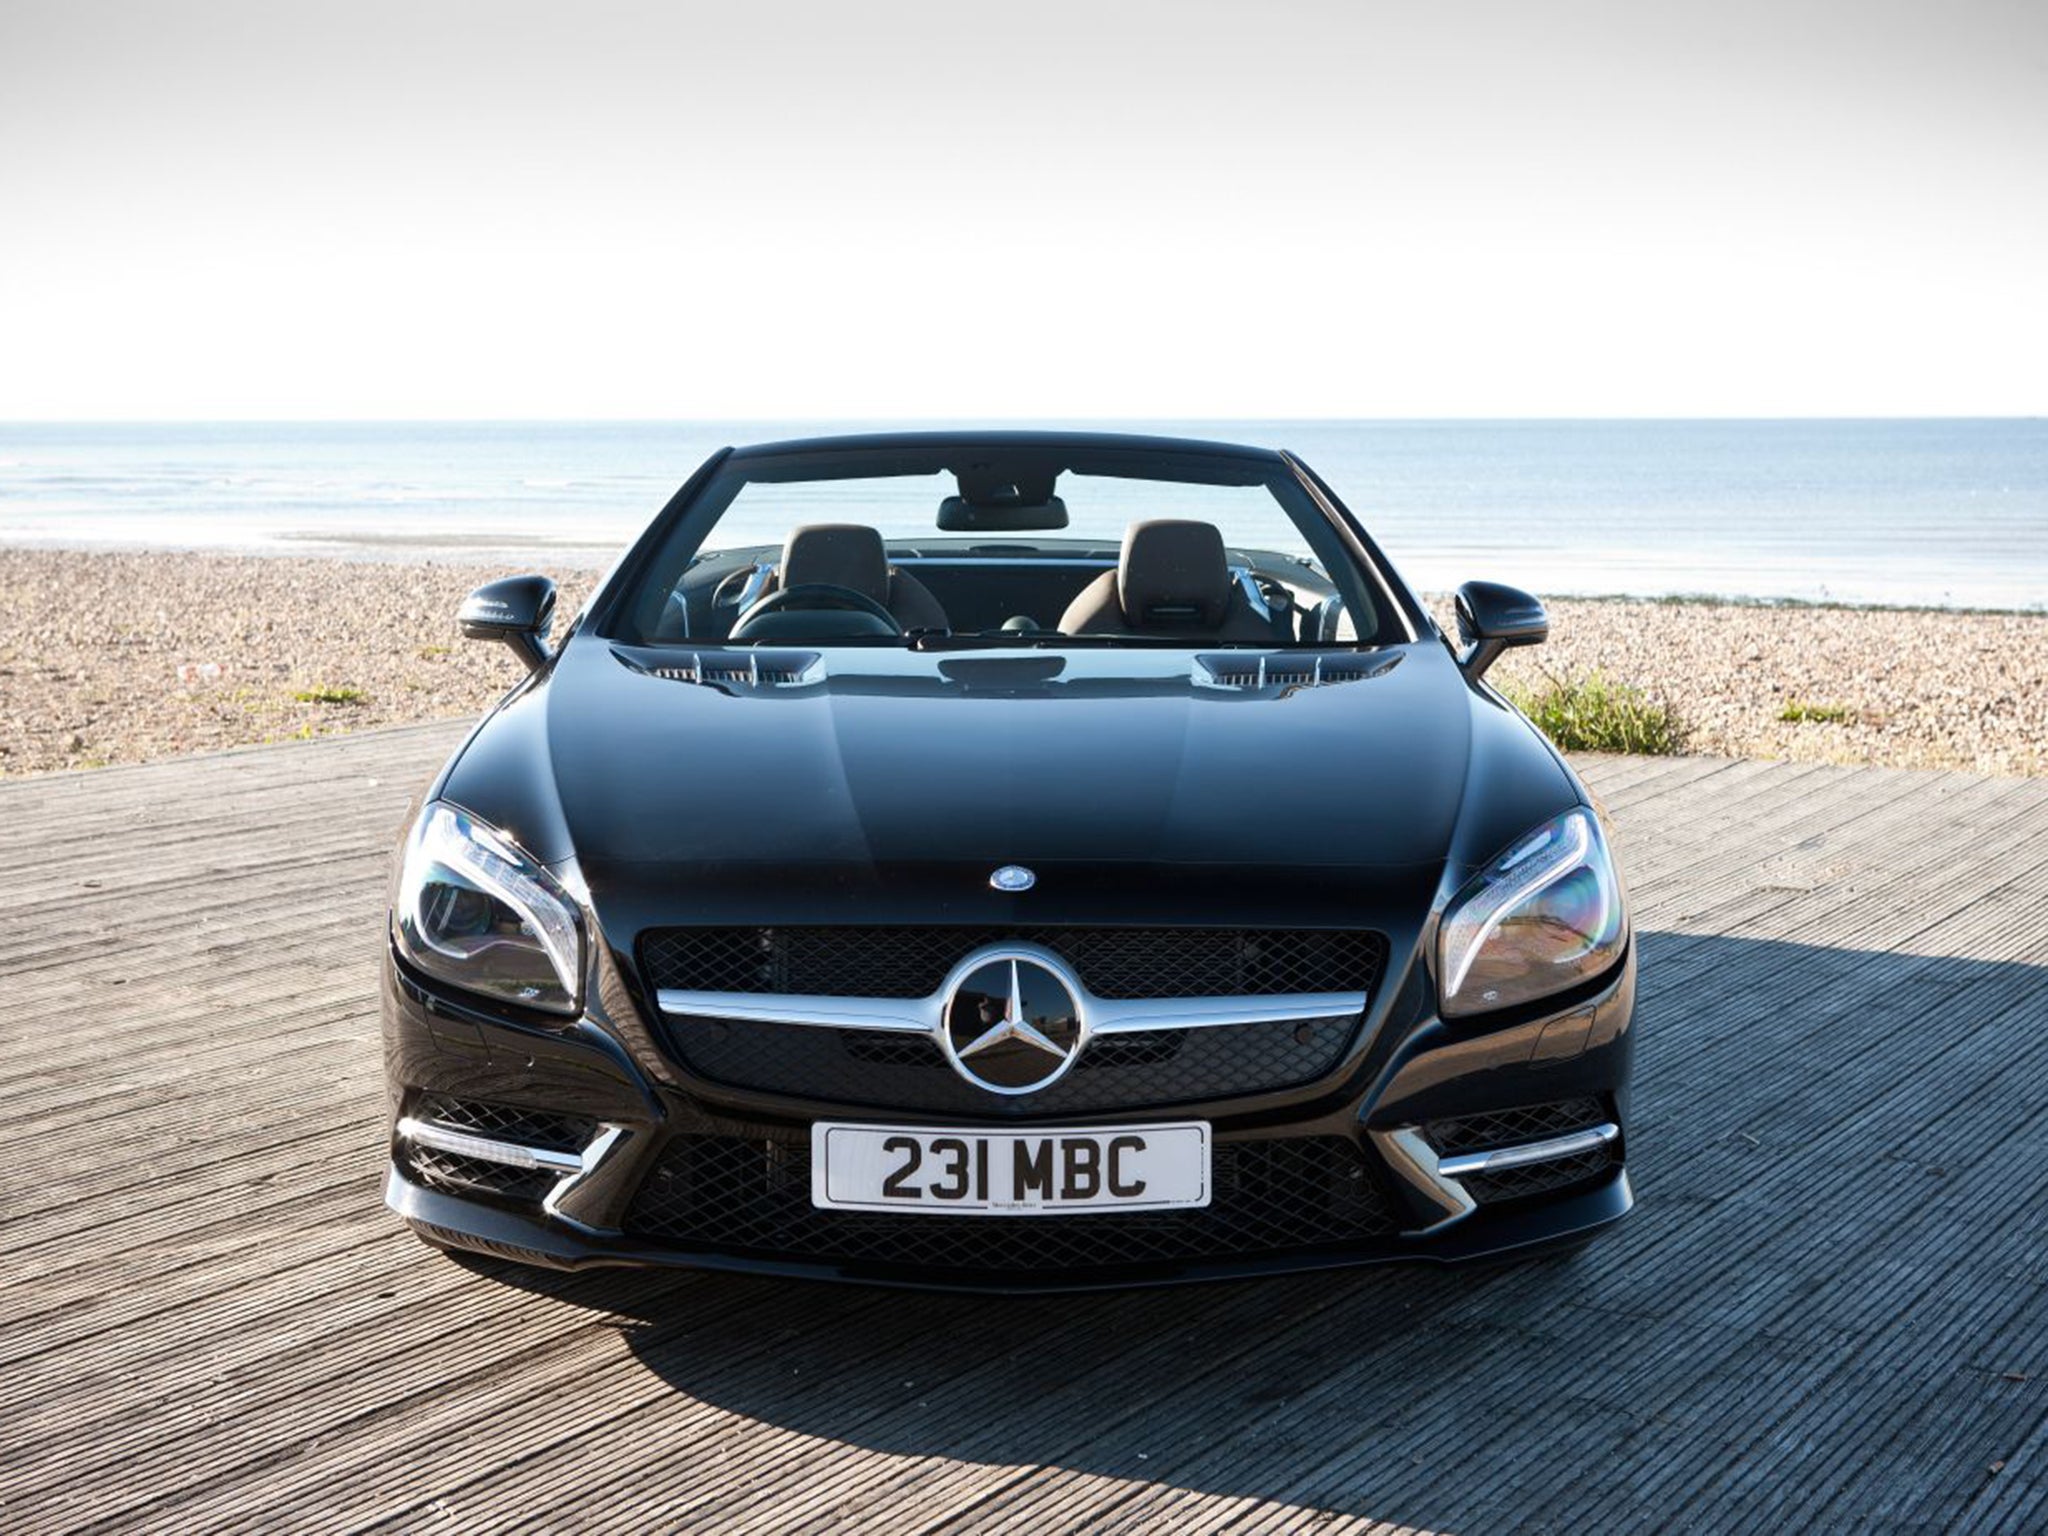 The SL400 is what the car magazines rather patronisingly call a 'gentleman's cruiser'